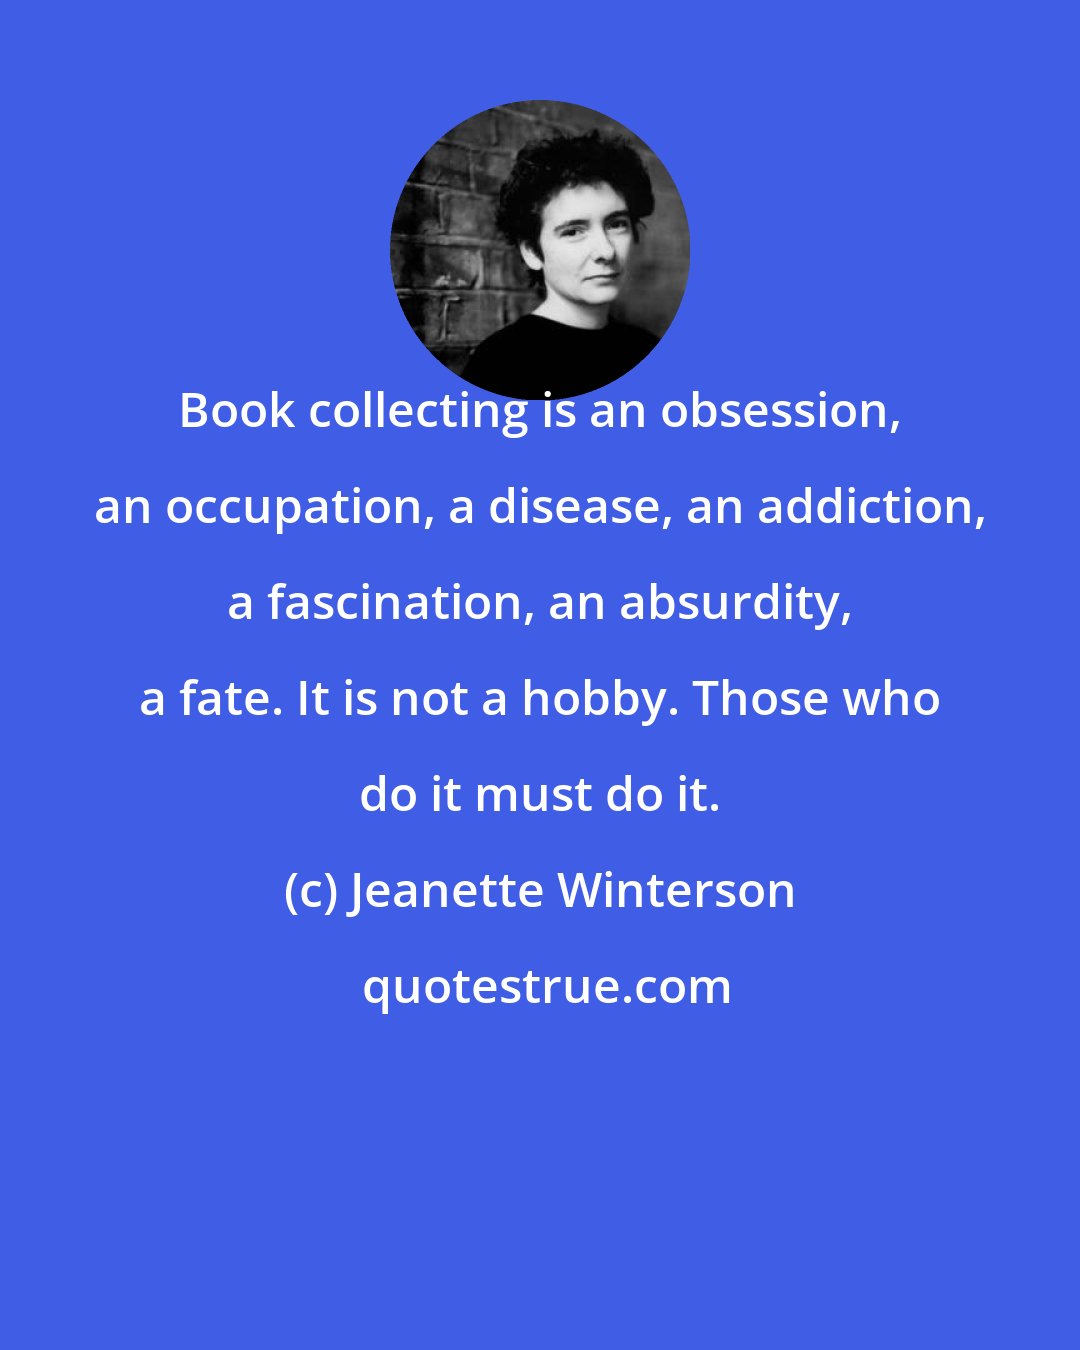 Jeanette Winterson: Book collecting is an obsession, an occupation, a disease, an addiction, a fascination, an absurdity, a fate. It is not a hobby. Those who do it must do it.